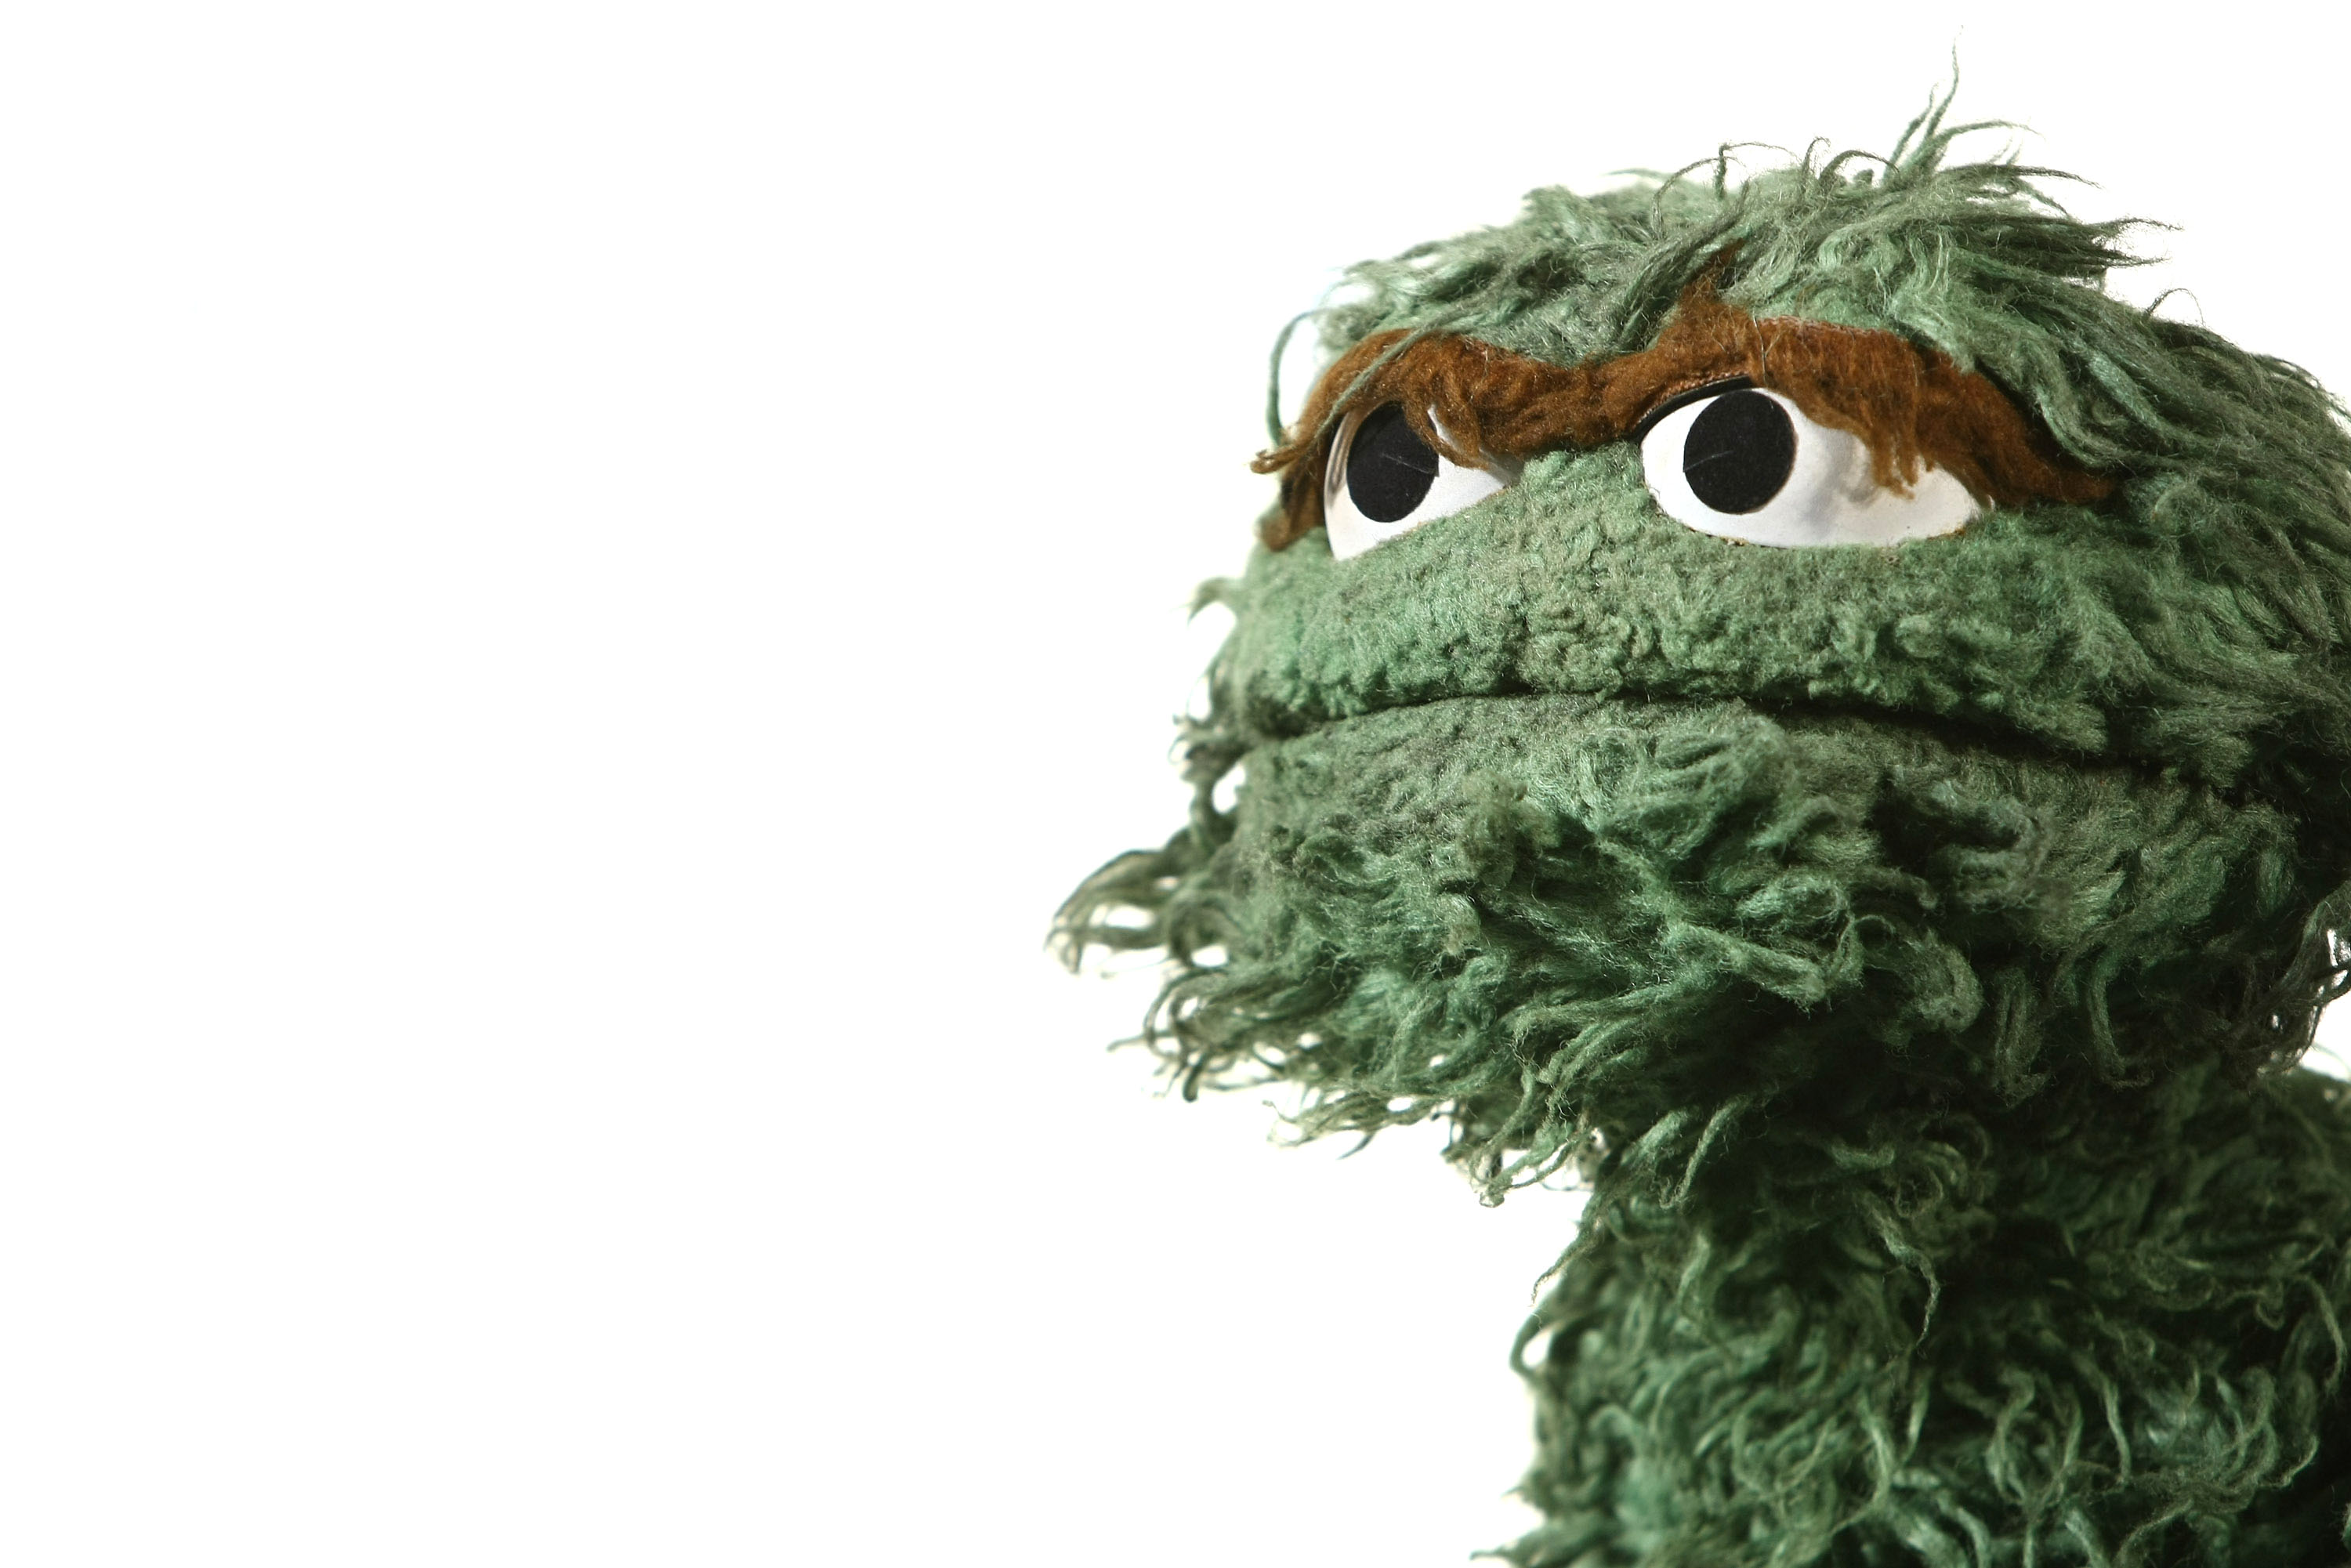 Oscar the Grouch from The Muppets TV show.